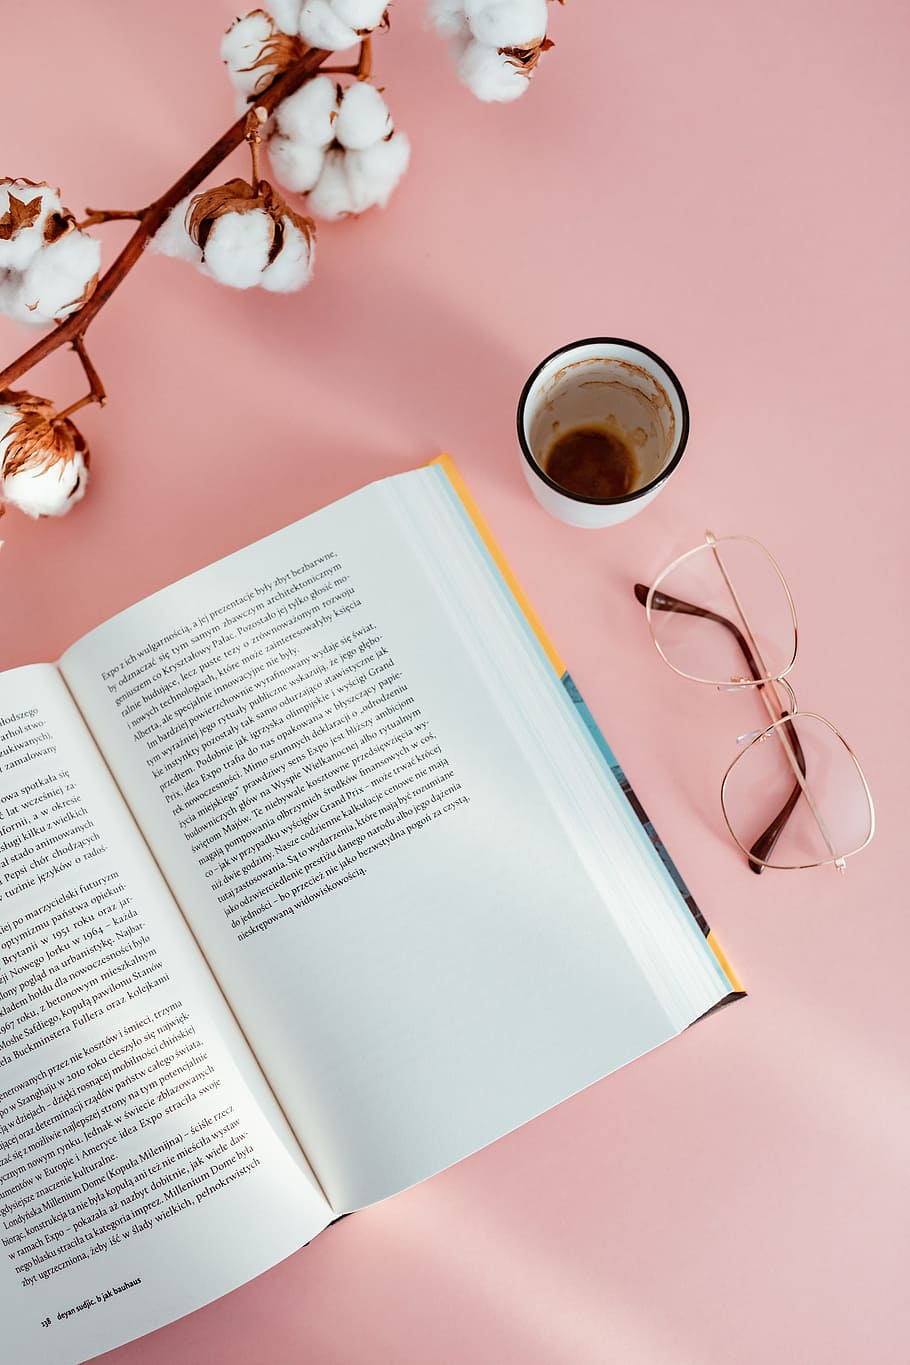 open, book, pink, background, reading, glasses, learning, pink backgound, study, feminine